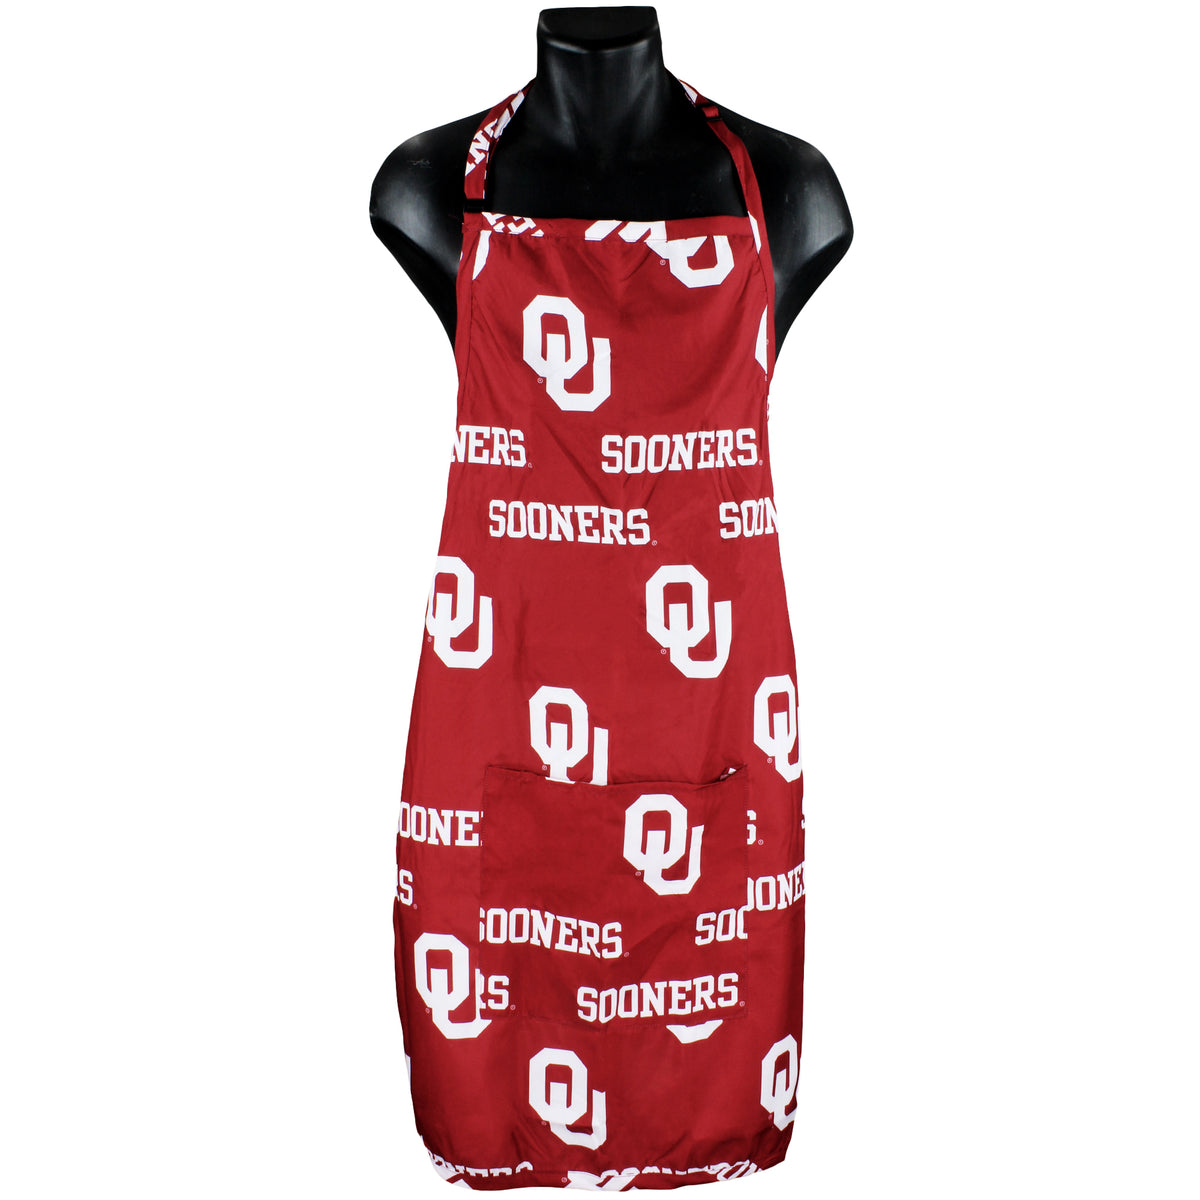 Oklahoma Sooners Grilling Tailgating Apron with 9' Pocket, Adjustable